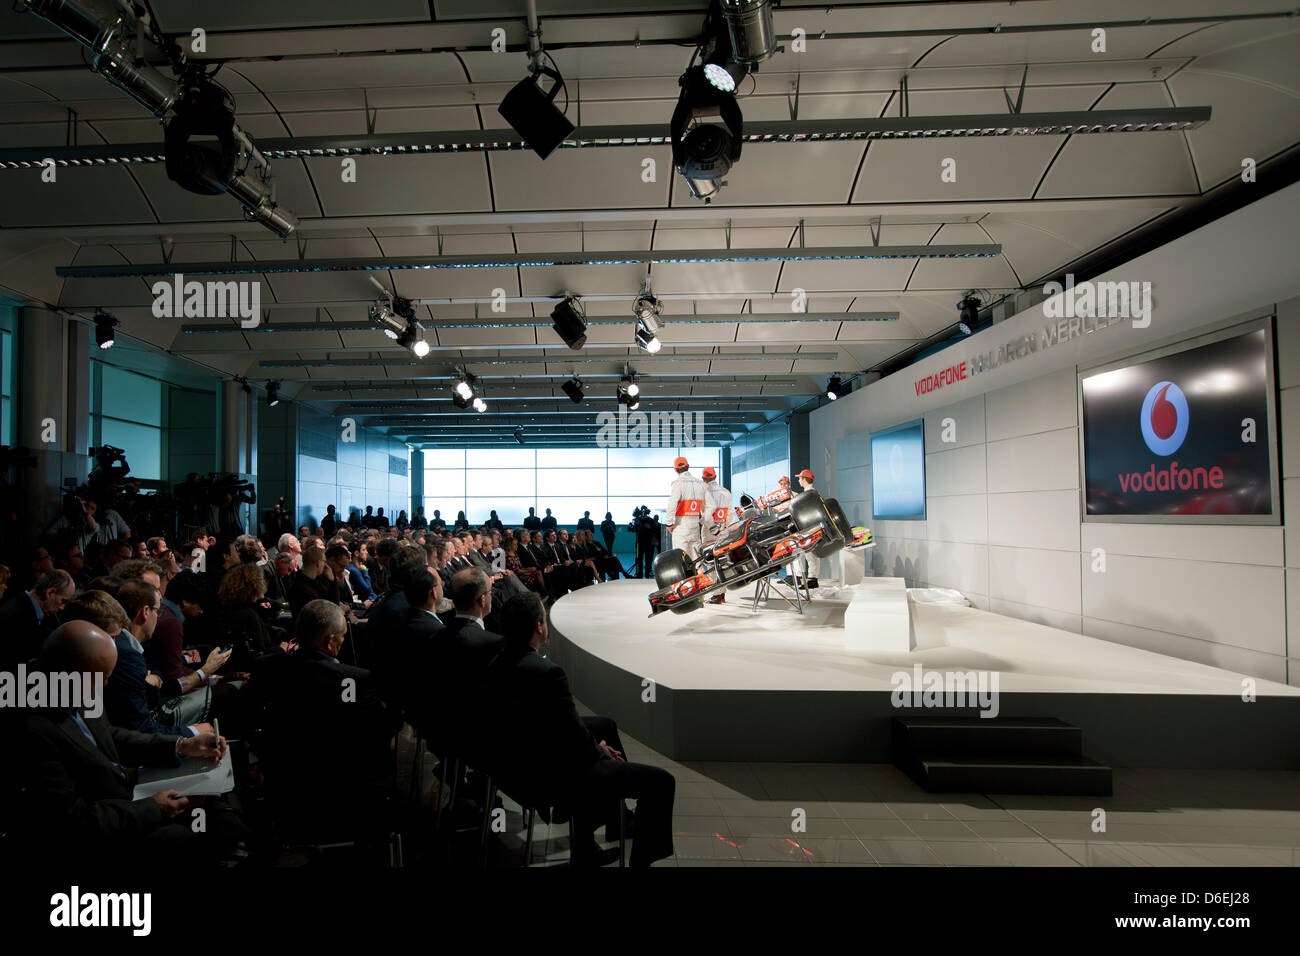 A handout picture dated 01 February 2012 shows the unveiling of the season 2013 McLaren Mercedes racing car MP4-27 at the company's headquarters in Woking, Great Britain. Photo: McLaren-Mercedes ( - ) Stock Photo